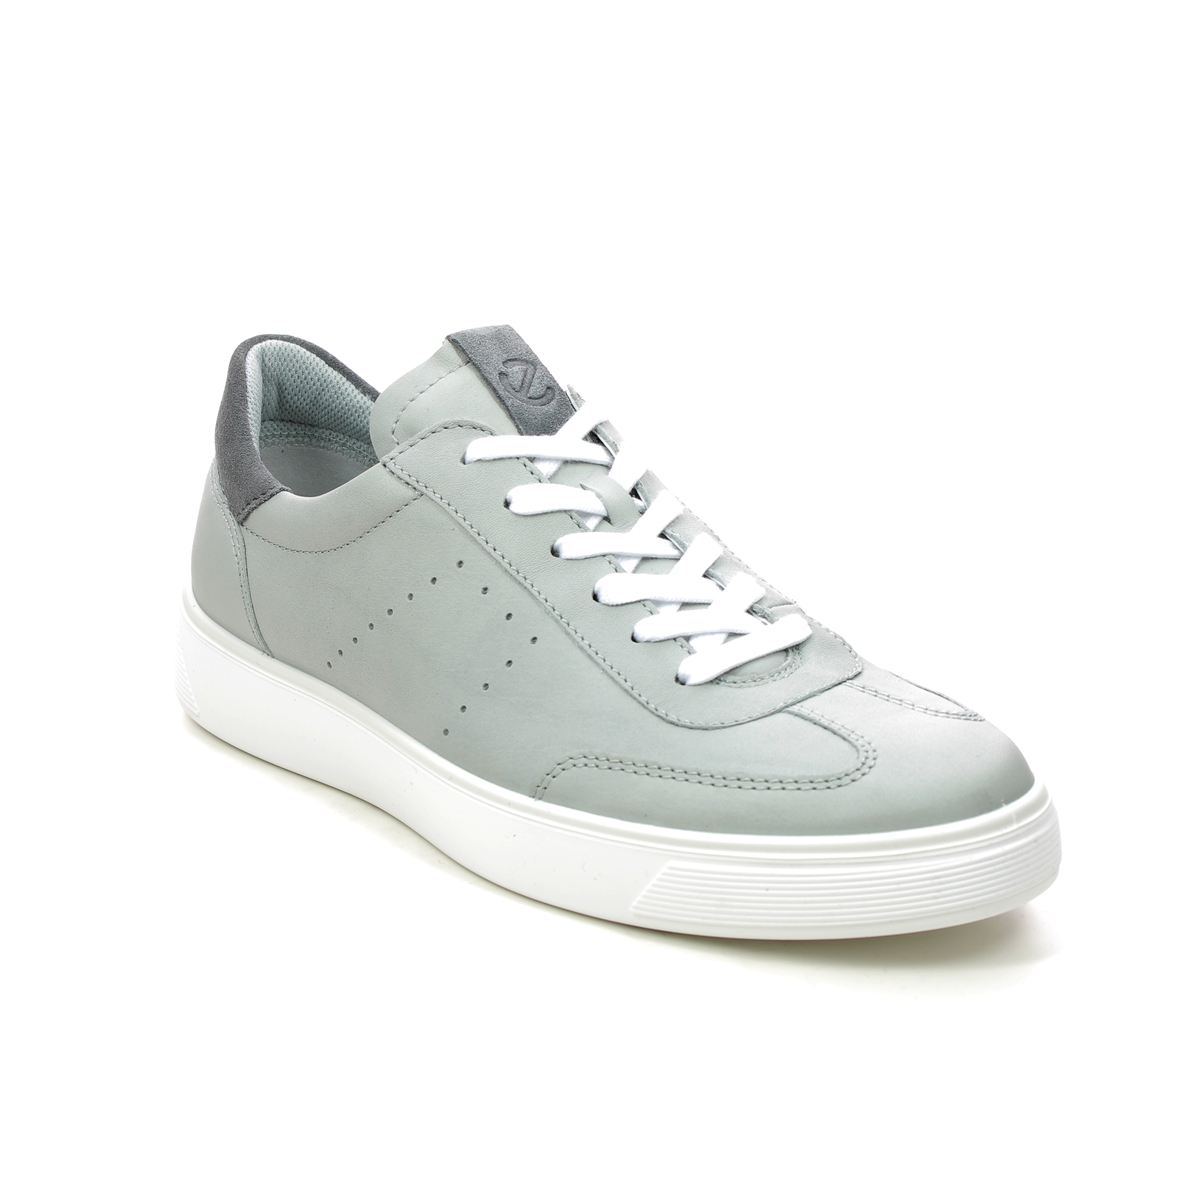 ECCO Street Tray Light Grey Leather Mens trainers 504714-54674 in a Plain Leather in Size 46